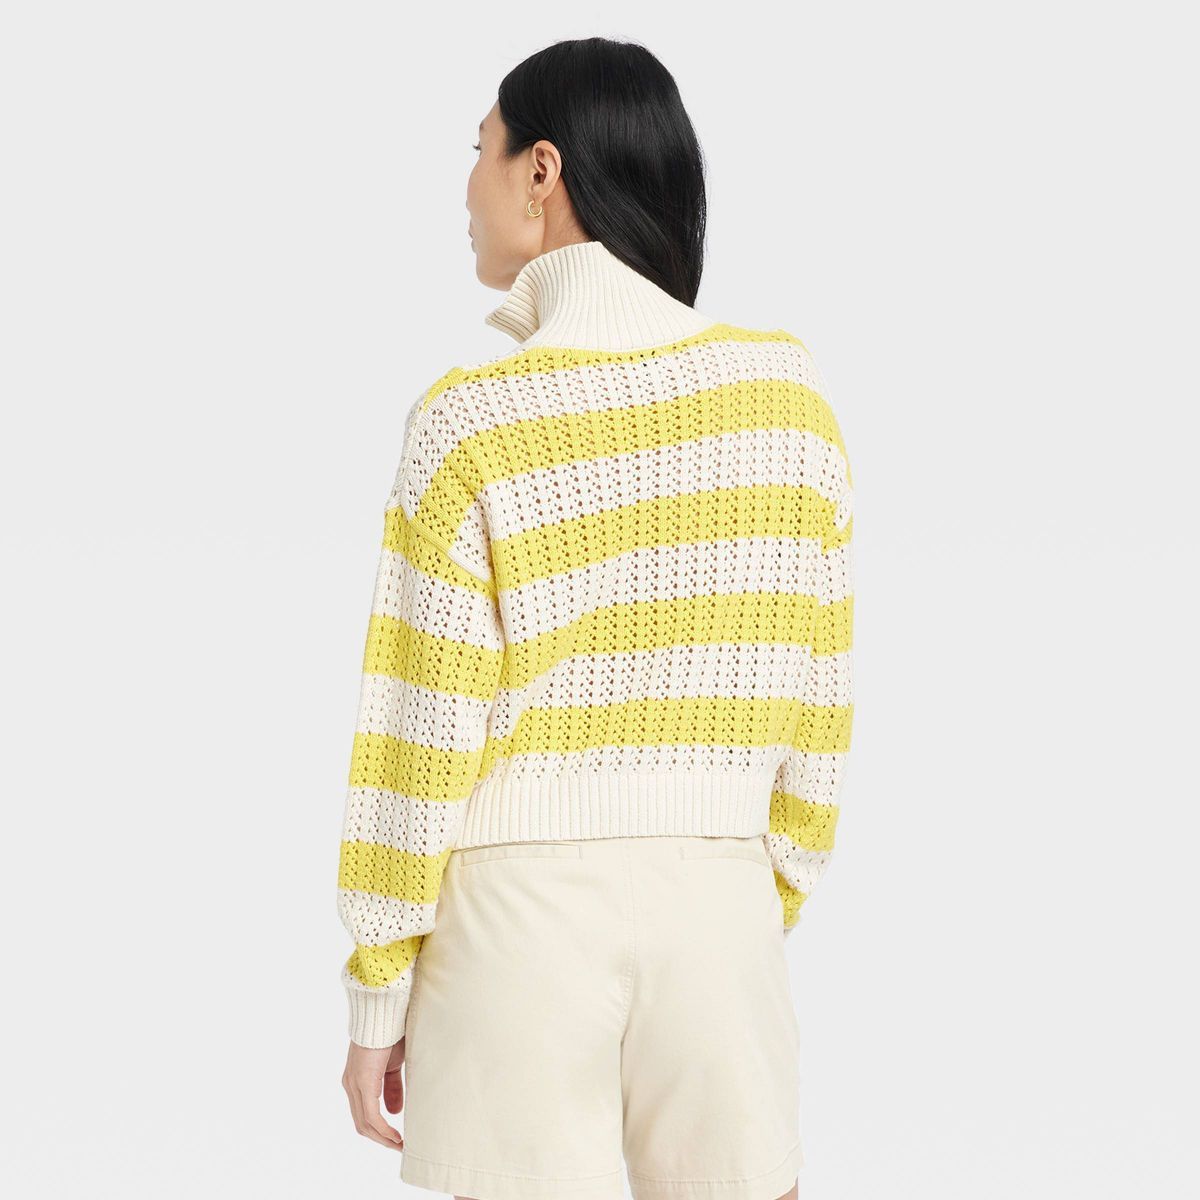 Women's Quarter Zip Mock Turtleneck Pullover Sweater - A New Day™ Yellow/White Striped L | Target